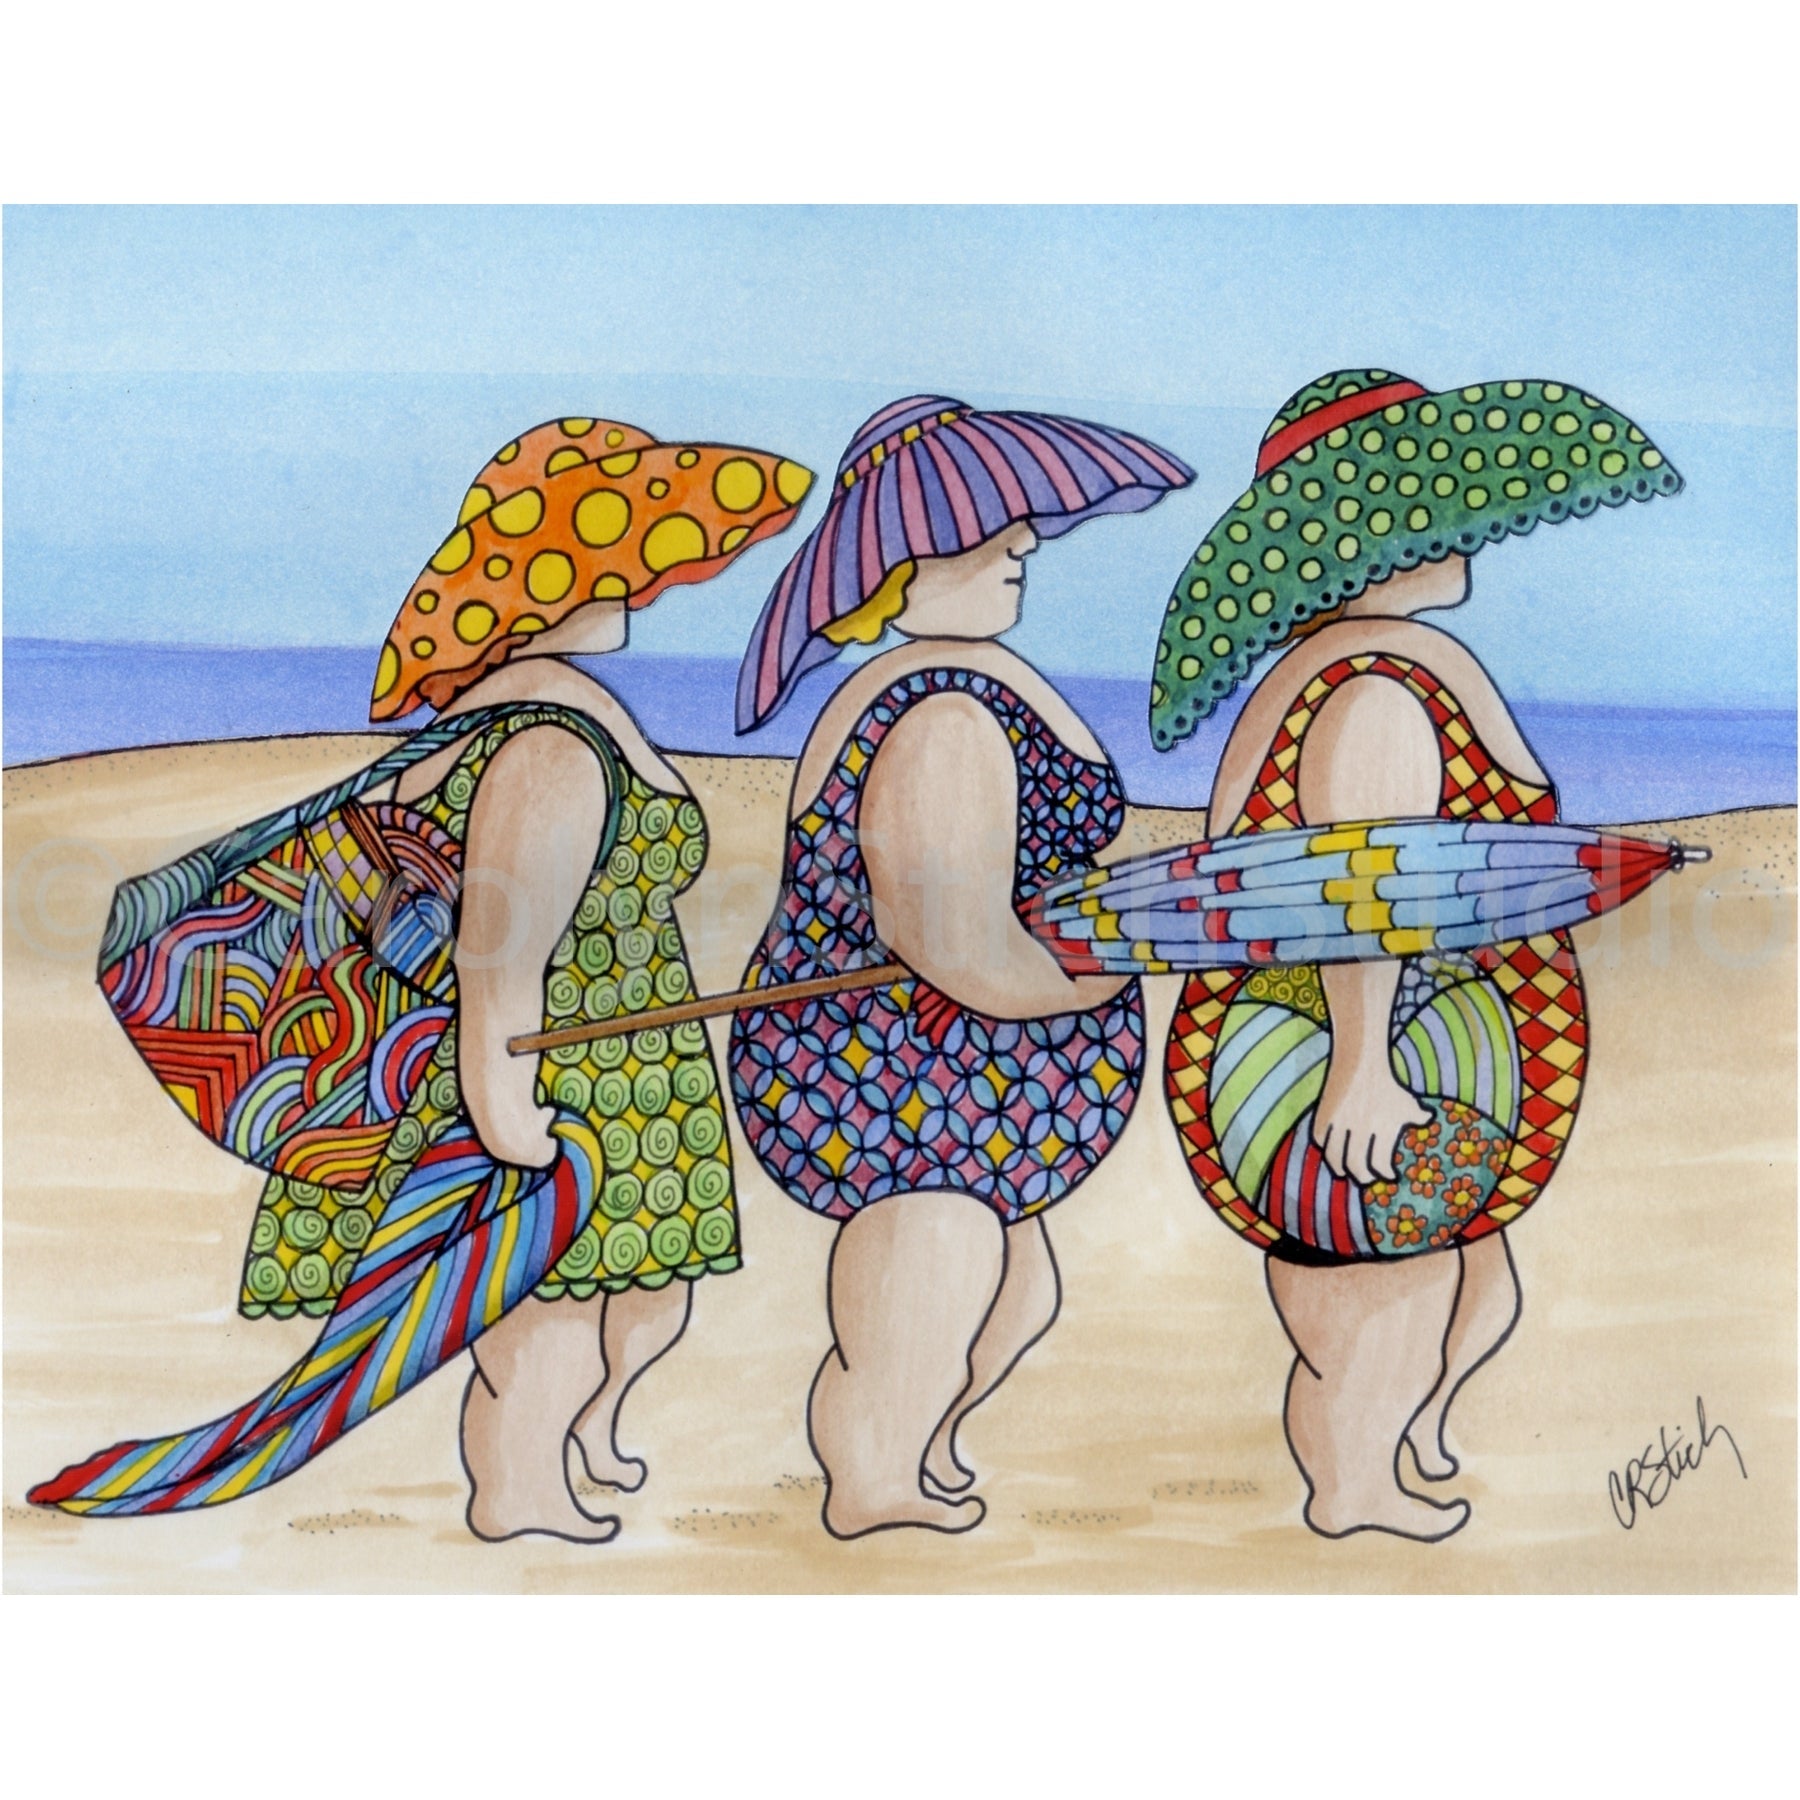 The Girls on the Beach, rug hooking pattern